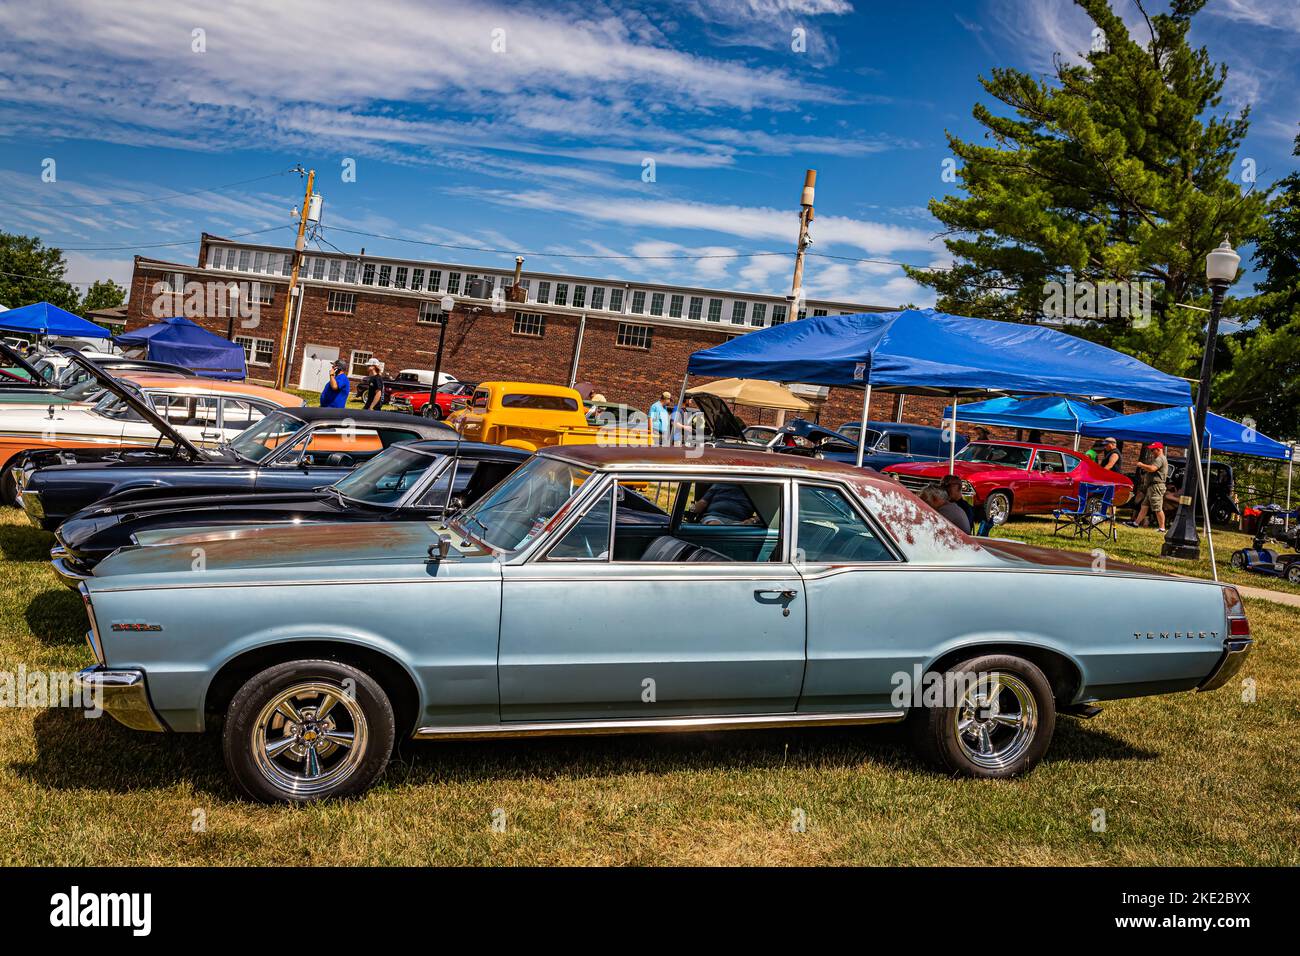 Des Moines, IA - July 02, 2022: High perspective side view of a 1965 Pontiac Tempest 2 Door Hardtop at a local car show. Stock Photo